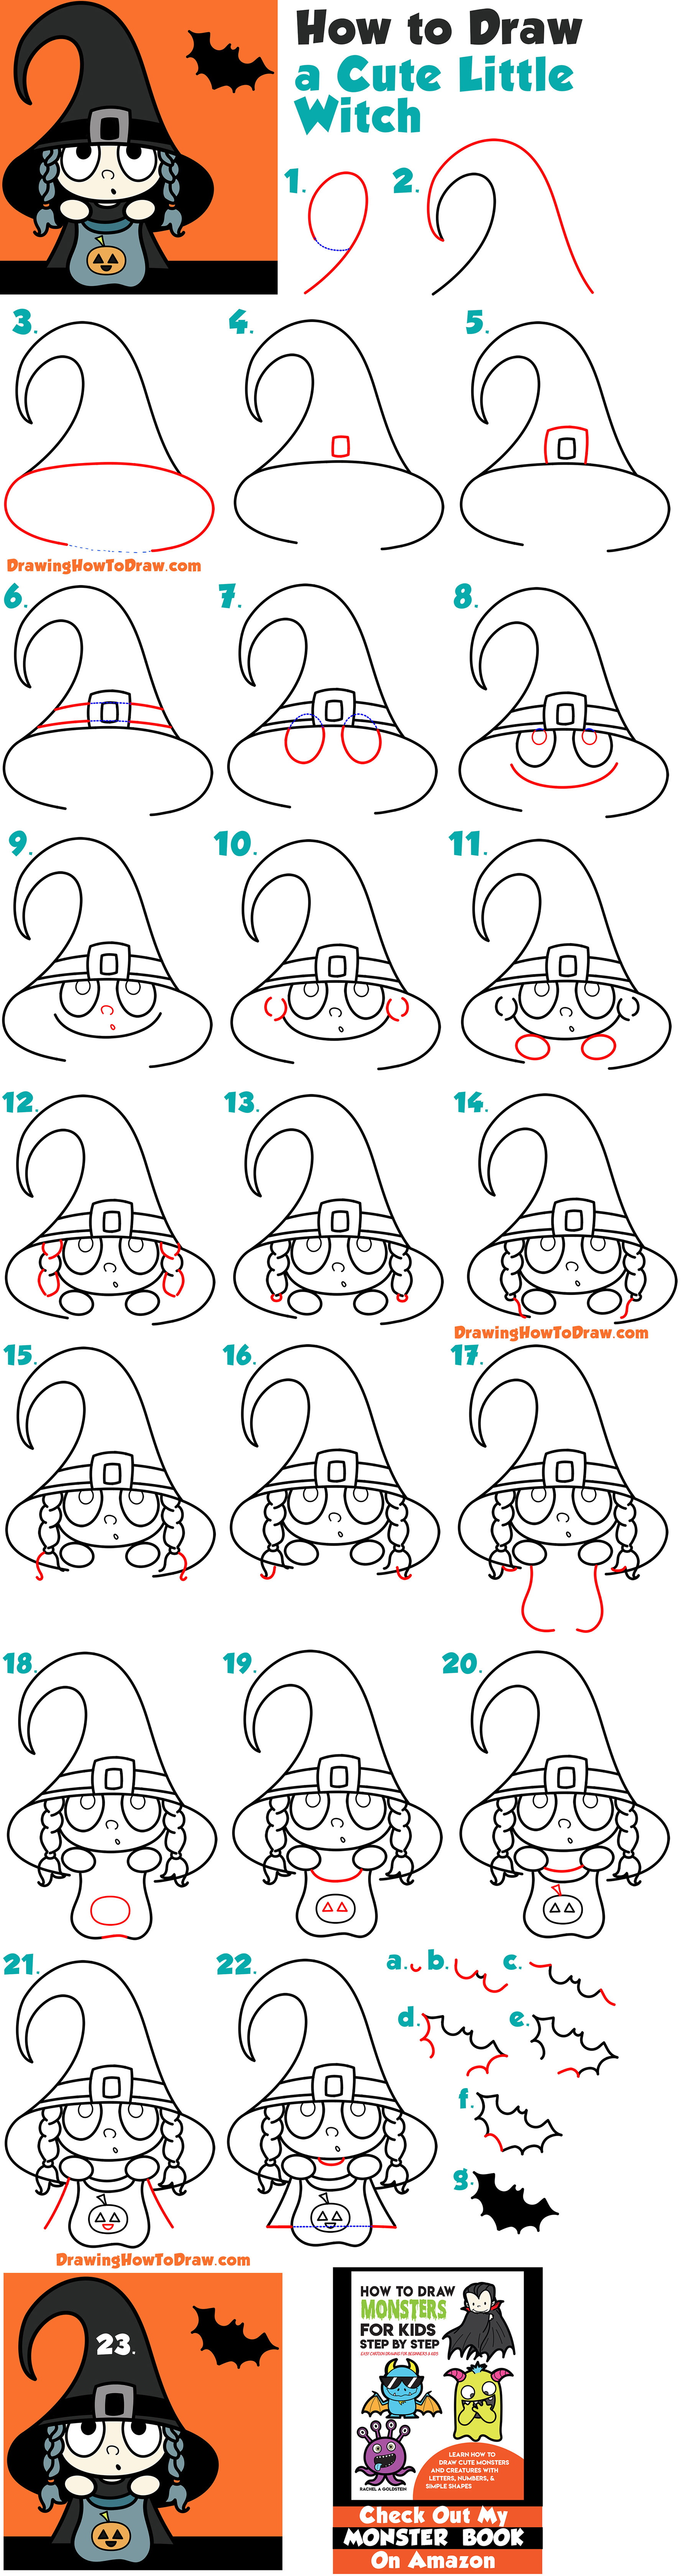 How to Draw a Cute Cartoon Kid Dressed Up as a Witch for Halloween - Simple Steps Drawing Lesson for Kids & Beginners